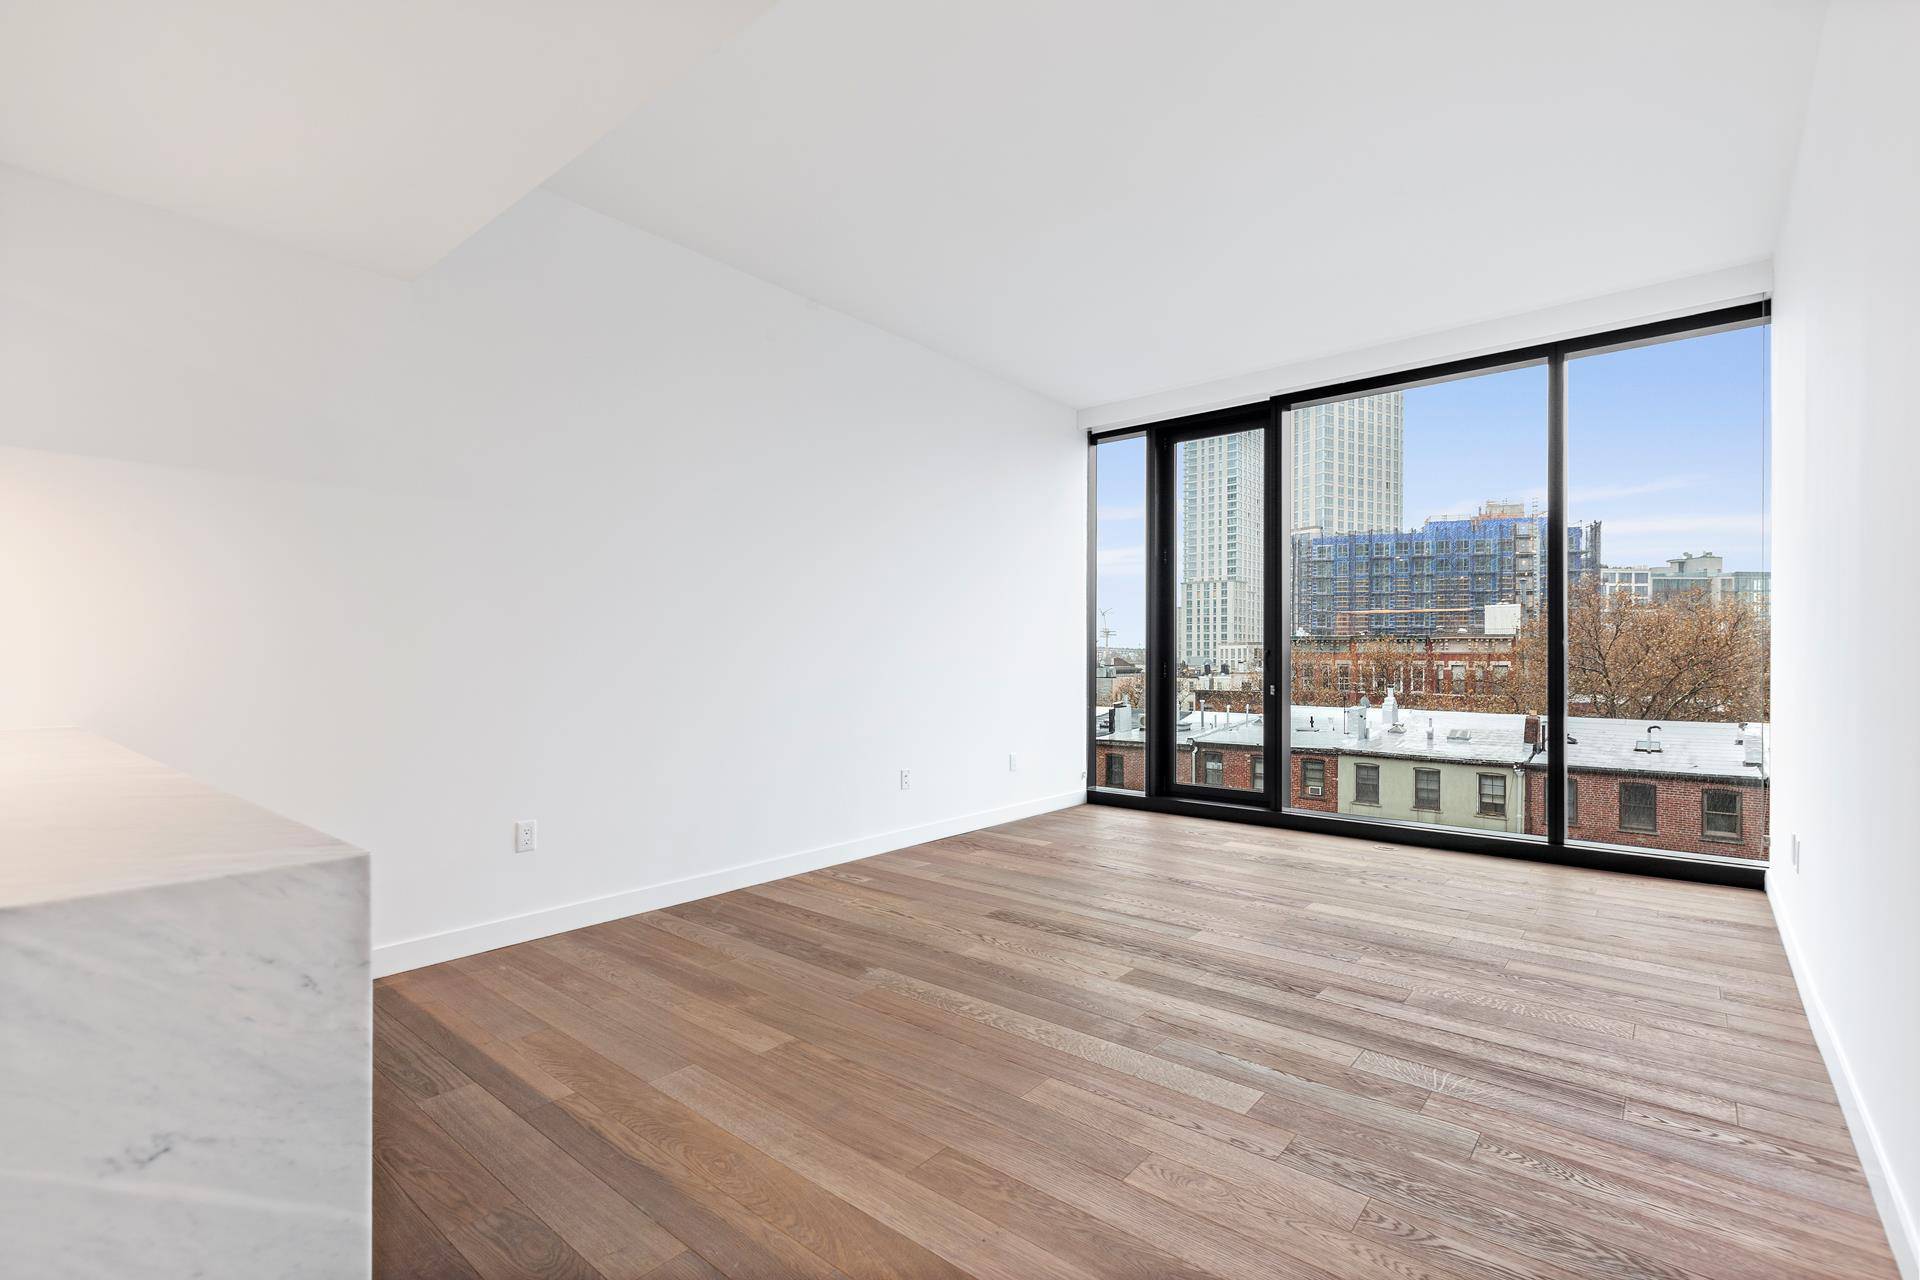 South facing 1 bedroom at CORTE, a new construction in Long Island City.